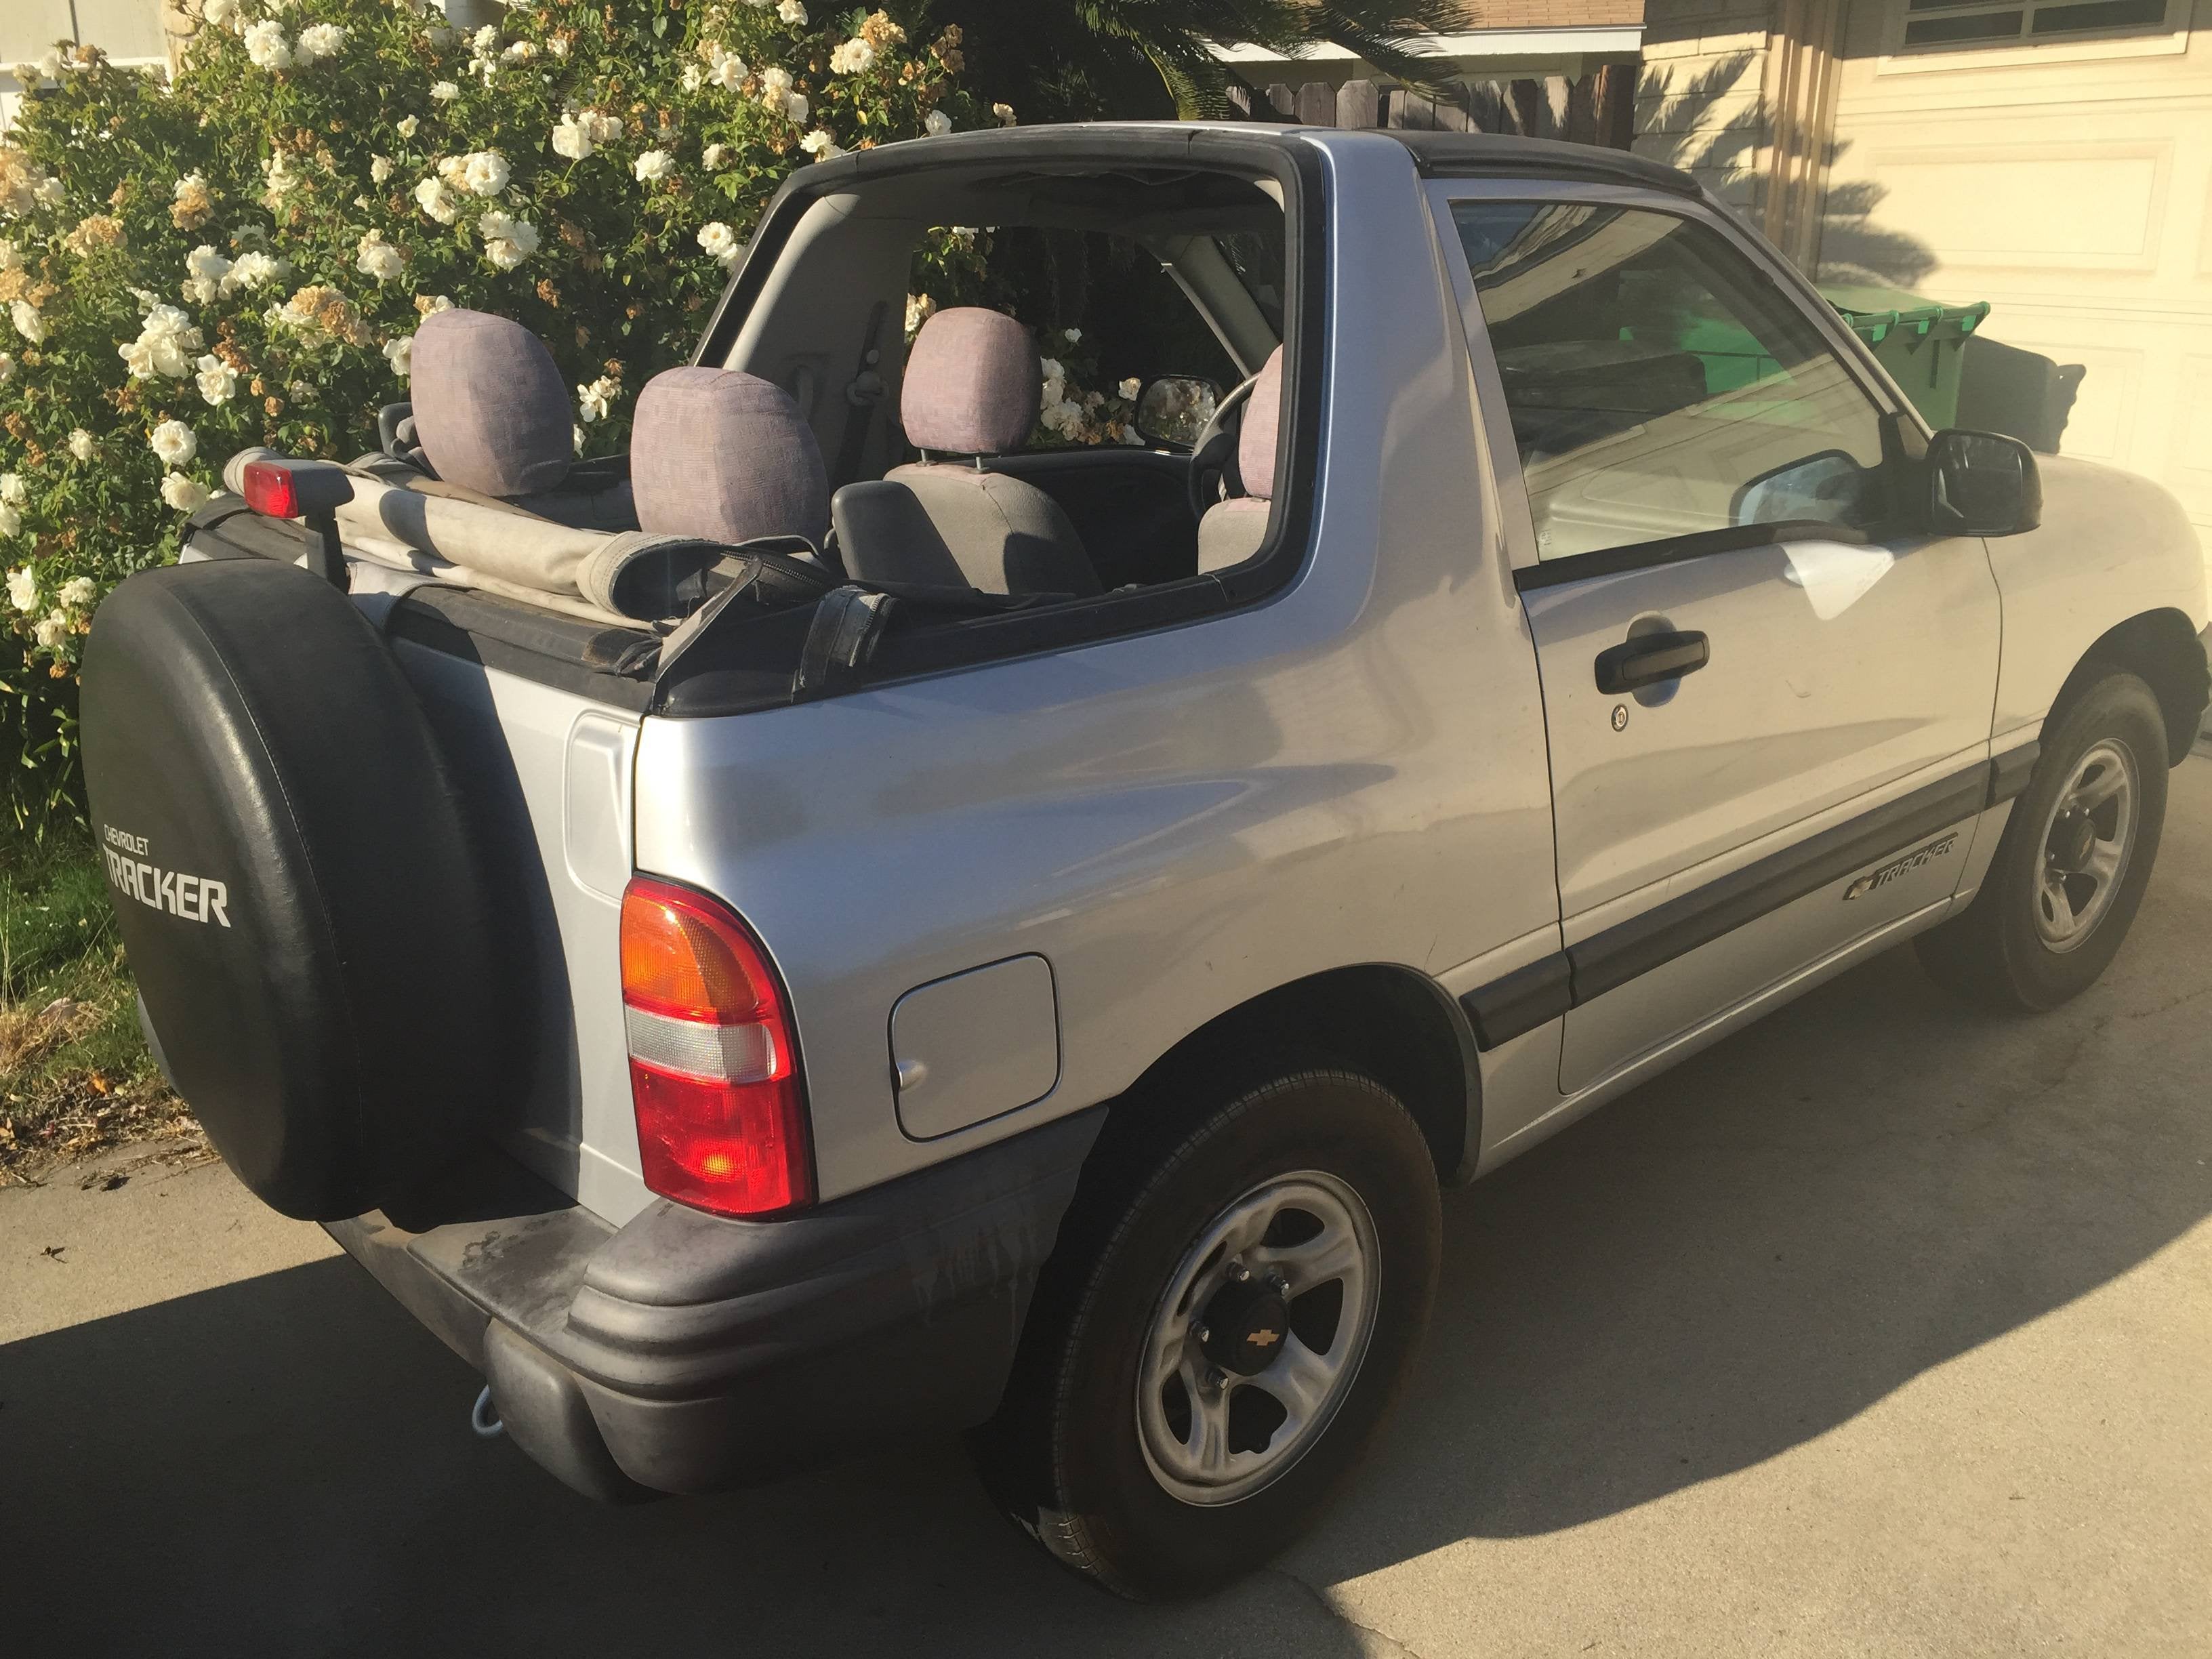 2000 chevy tracker- got it for free, only 47,000 miles, now what??! : r/4x4